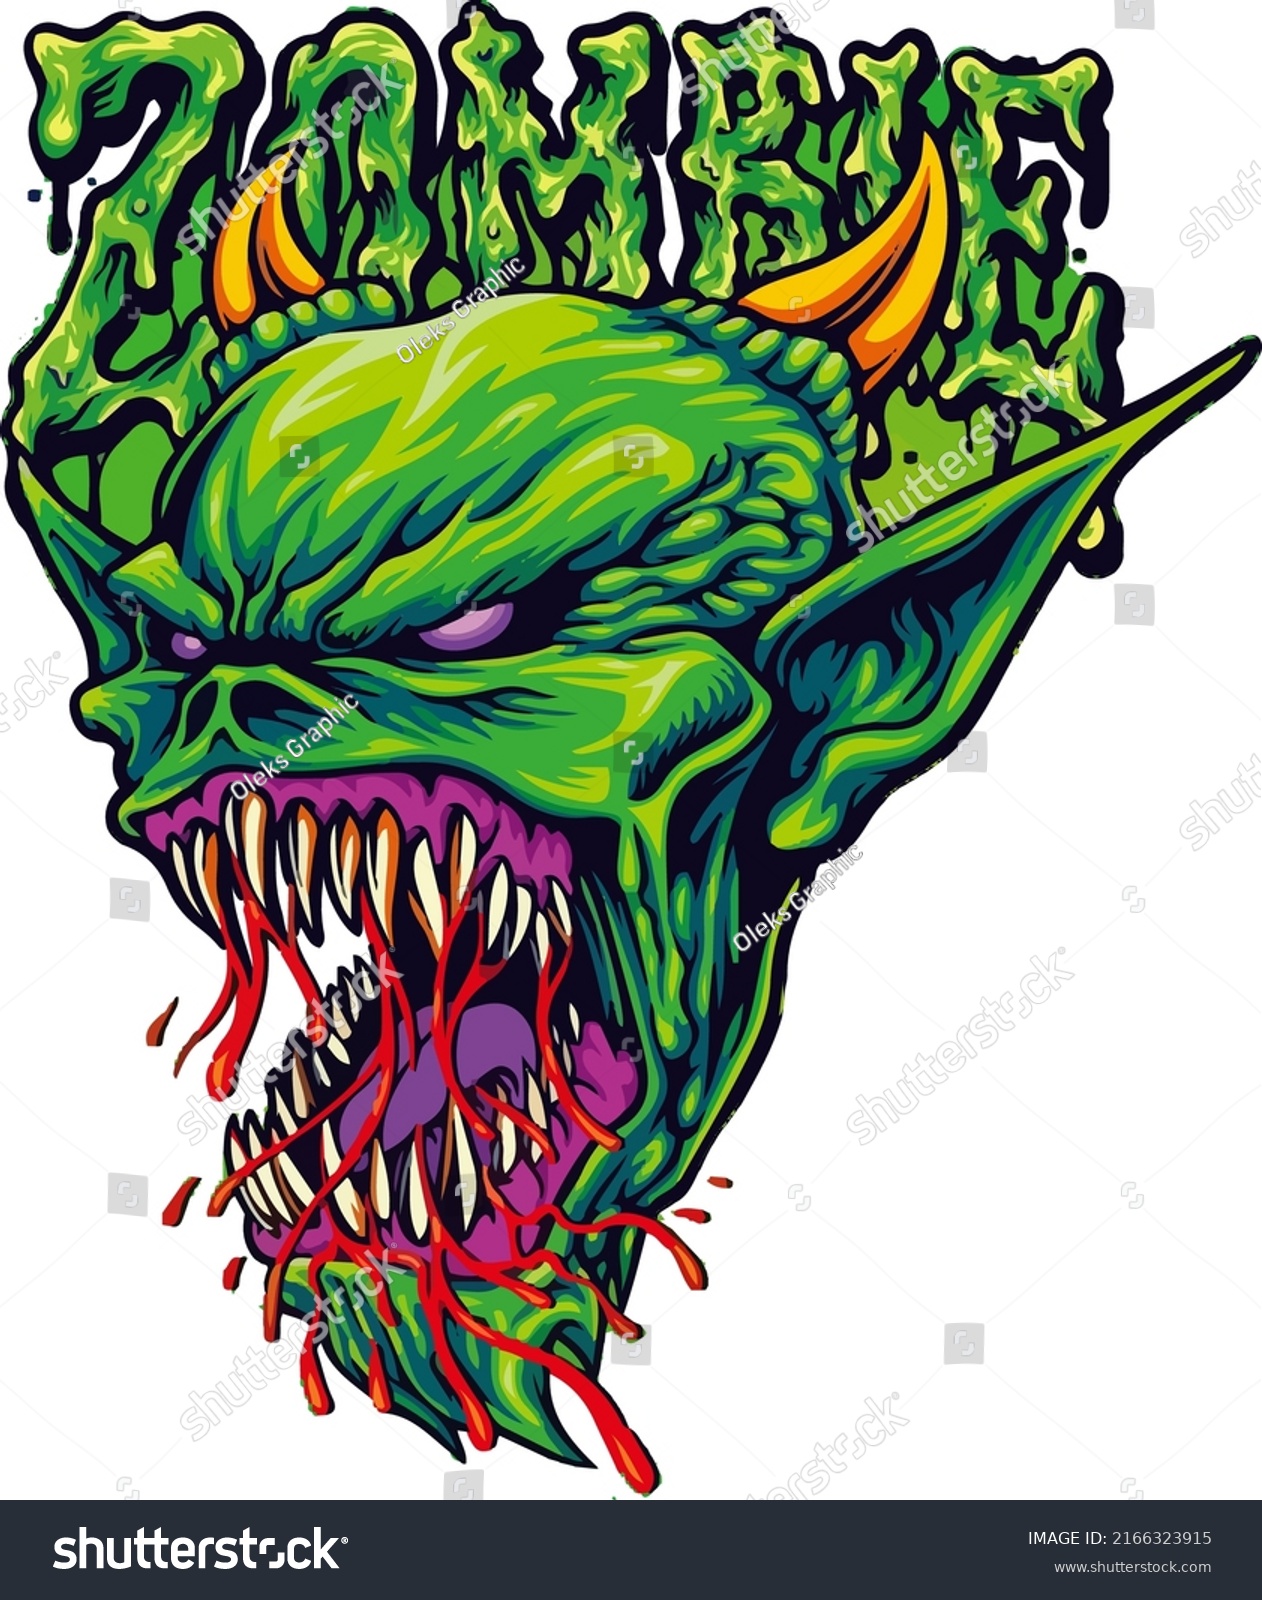 SVG of scary zombie head vector eps svg